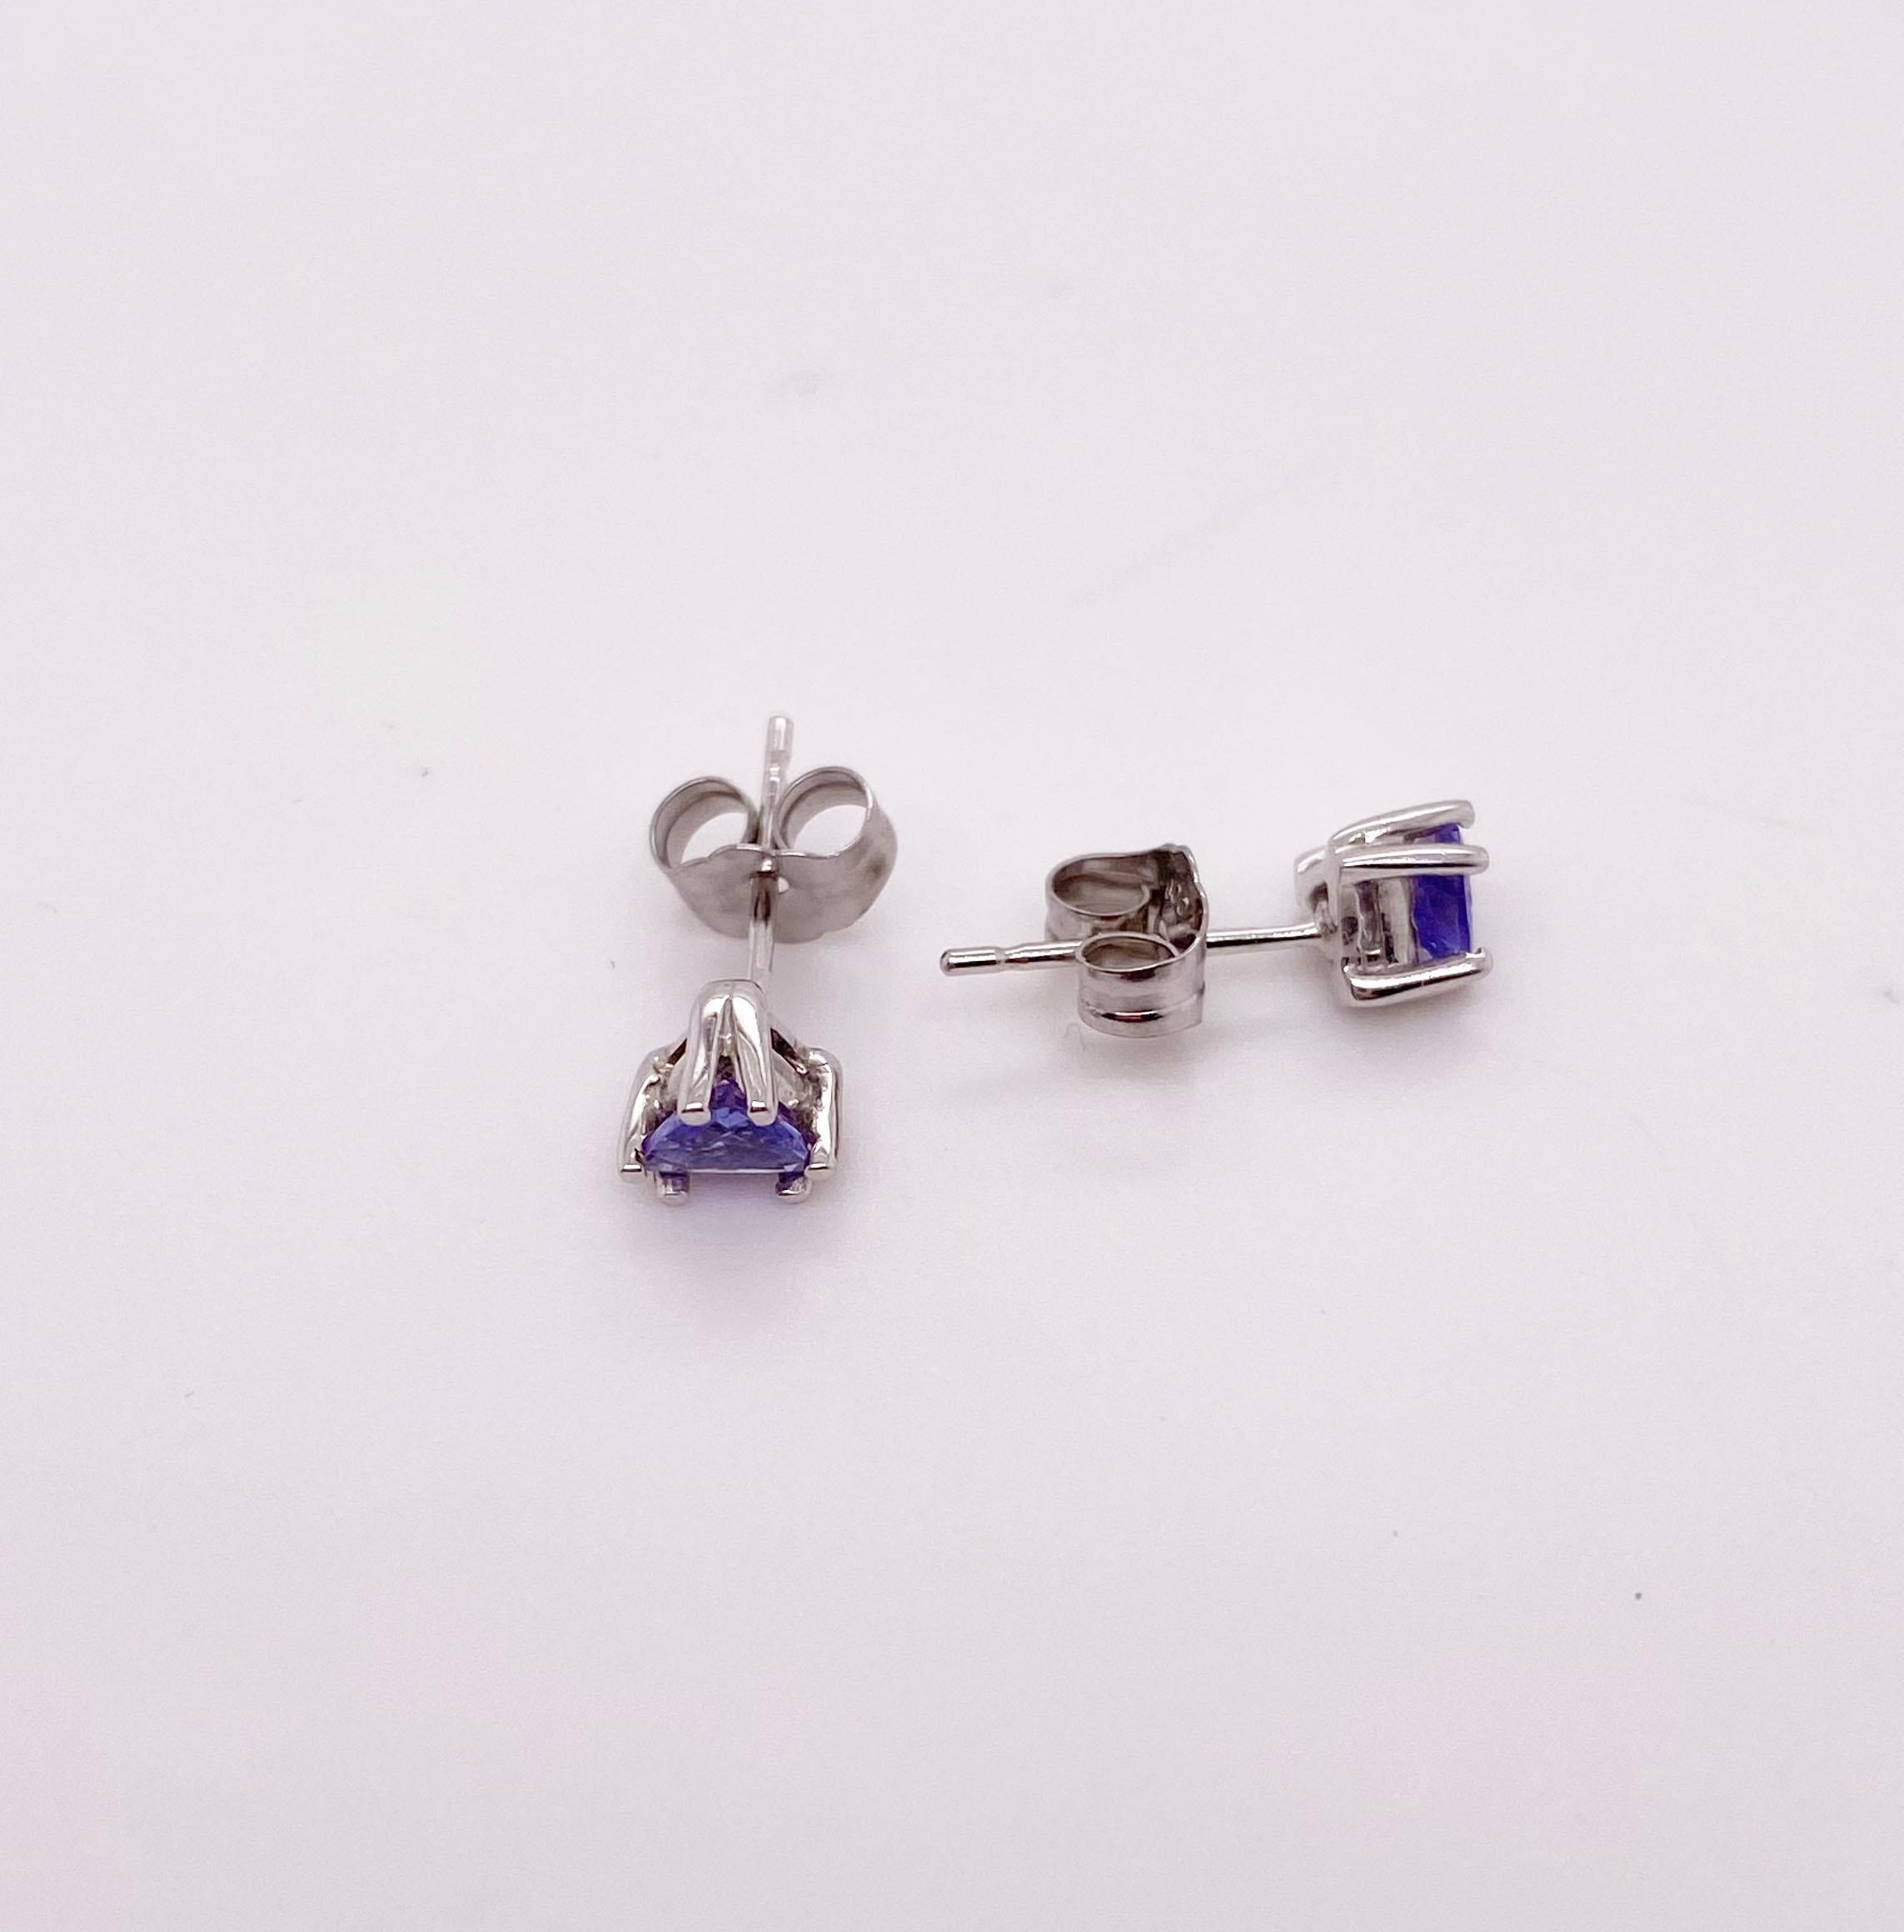 The details for these gorgeous earrings are listed below:
Metal Quality: 14 kt White Gold 
Earring Type: Stud
Gemstone: Tanzanite 
Gemstone Weight: .29 ct
Gemstone Color: Purple
Measurements: 5mm X 4 mm 
Post Type: Stud
Total Carat Weight: .29 ct